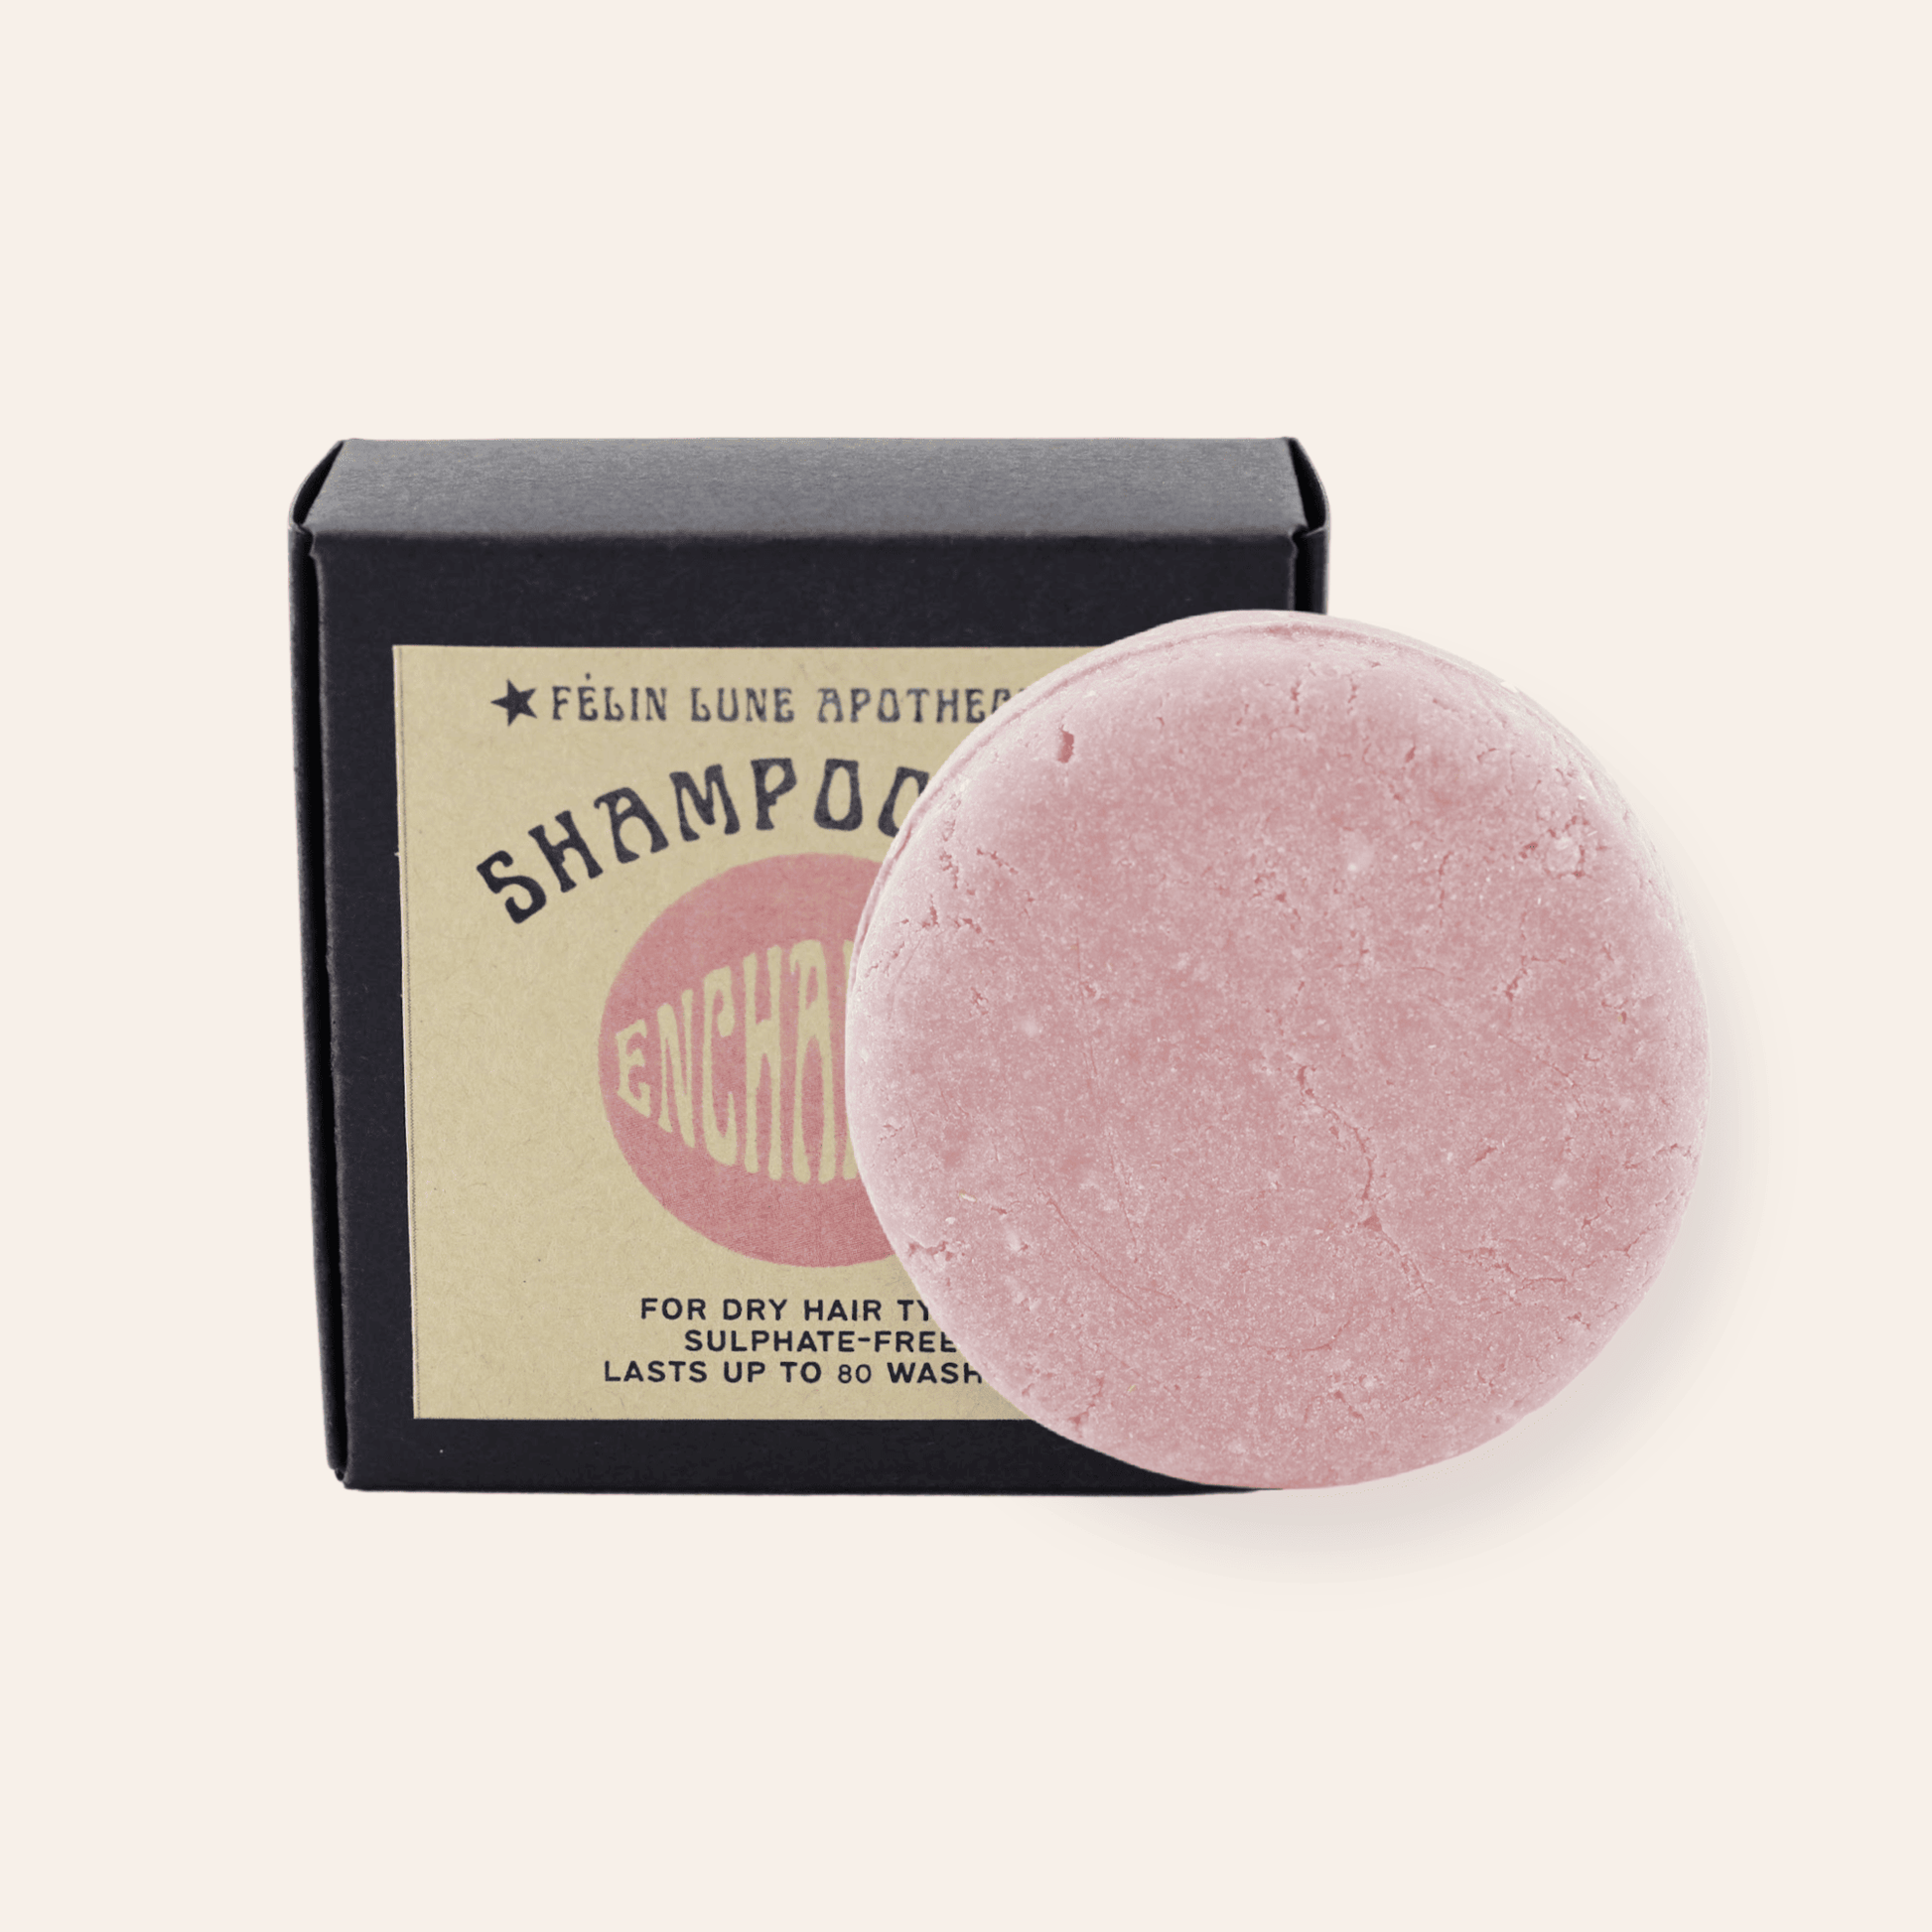 A round pink shampoo bar set in front of a black box and kraft label.